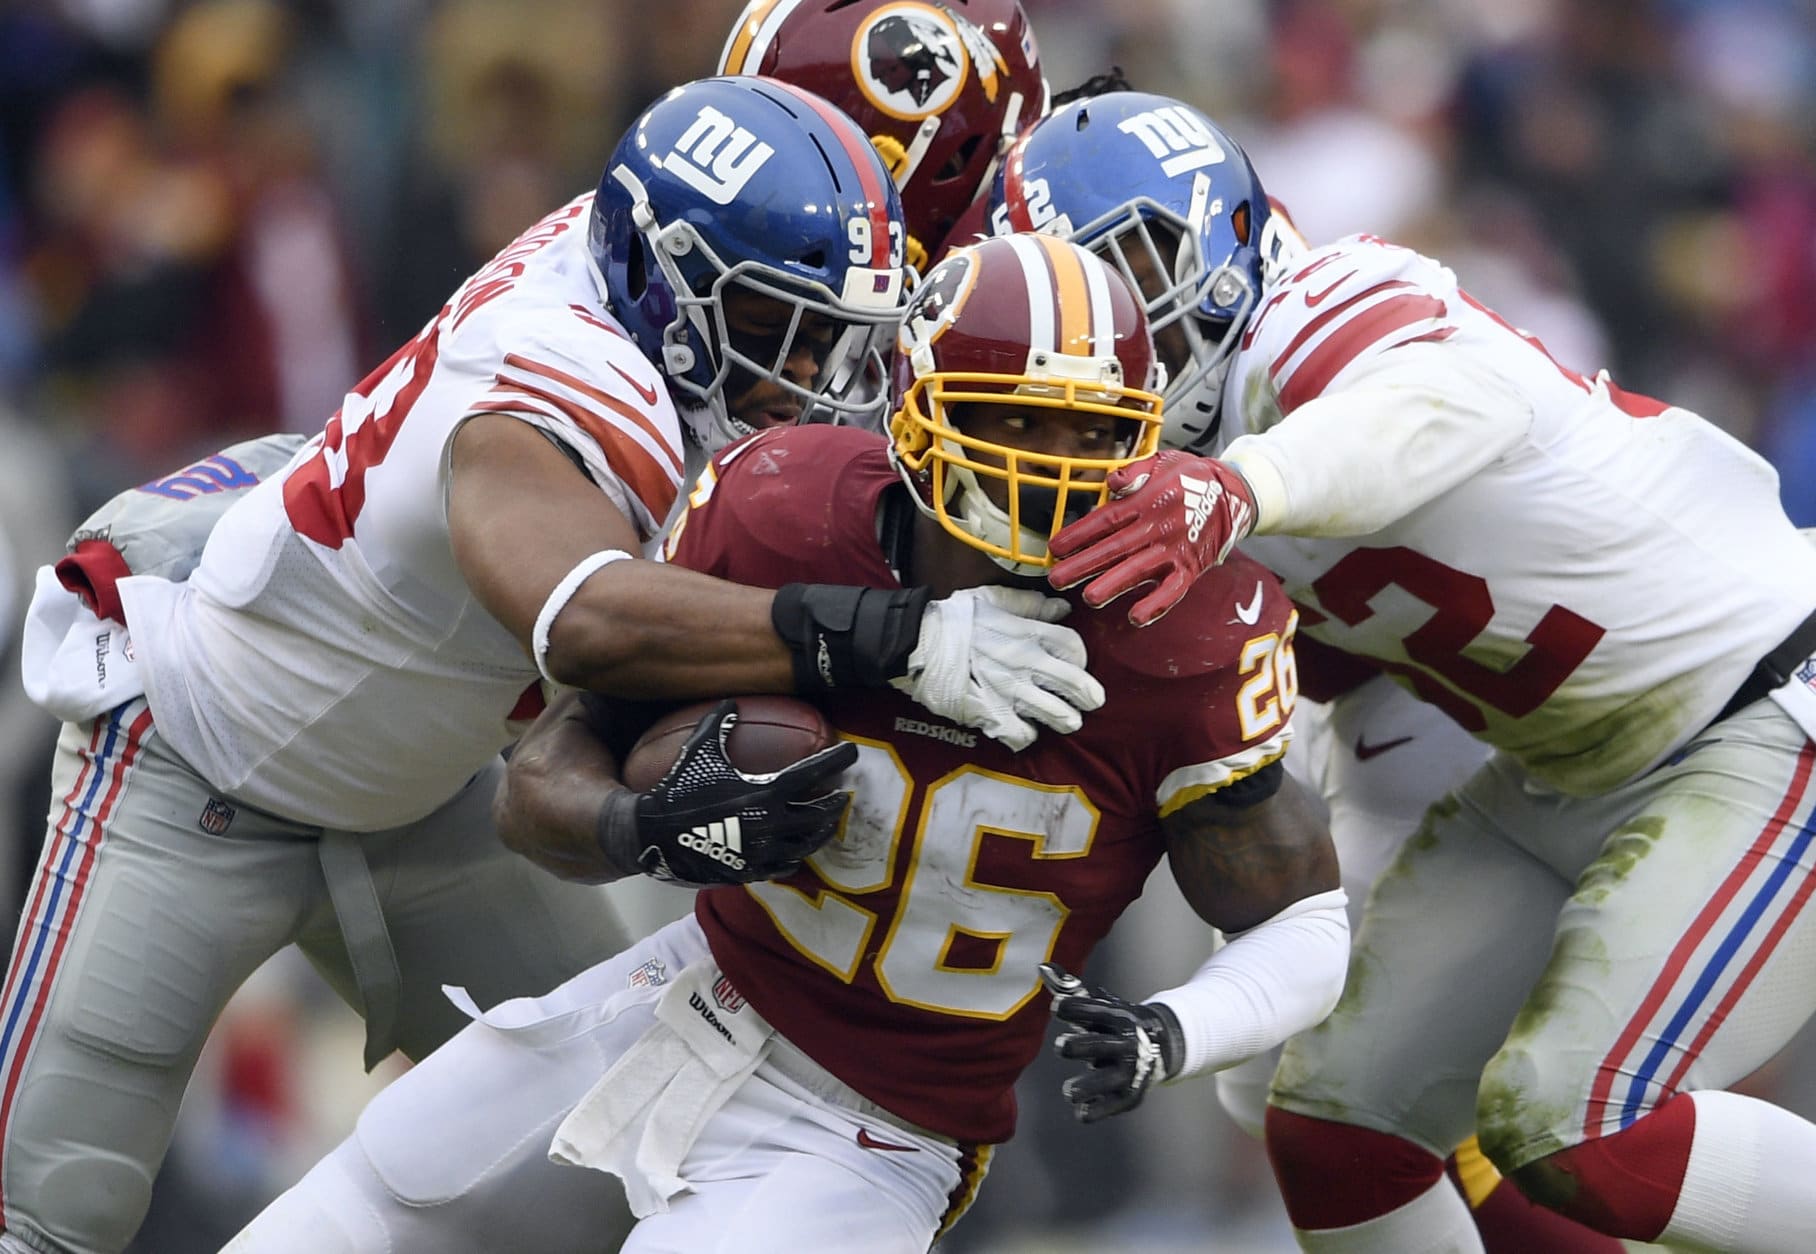 New York Giants linebackers B.J. Goodson, left, and Alec Ogletree, tackle Washington Redskins running back Adrian Peterson (26) during the first half of an NFL football game Sunday, Dec. 9, 2018, in Landover, Md. (AP Photo/Nick Wass)